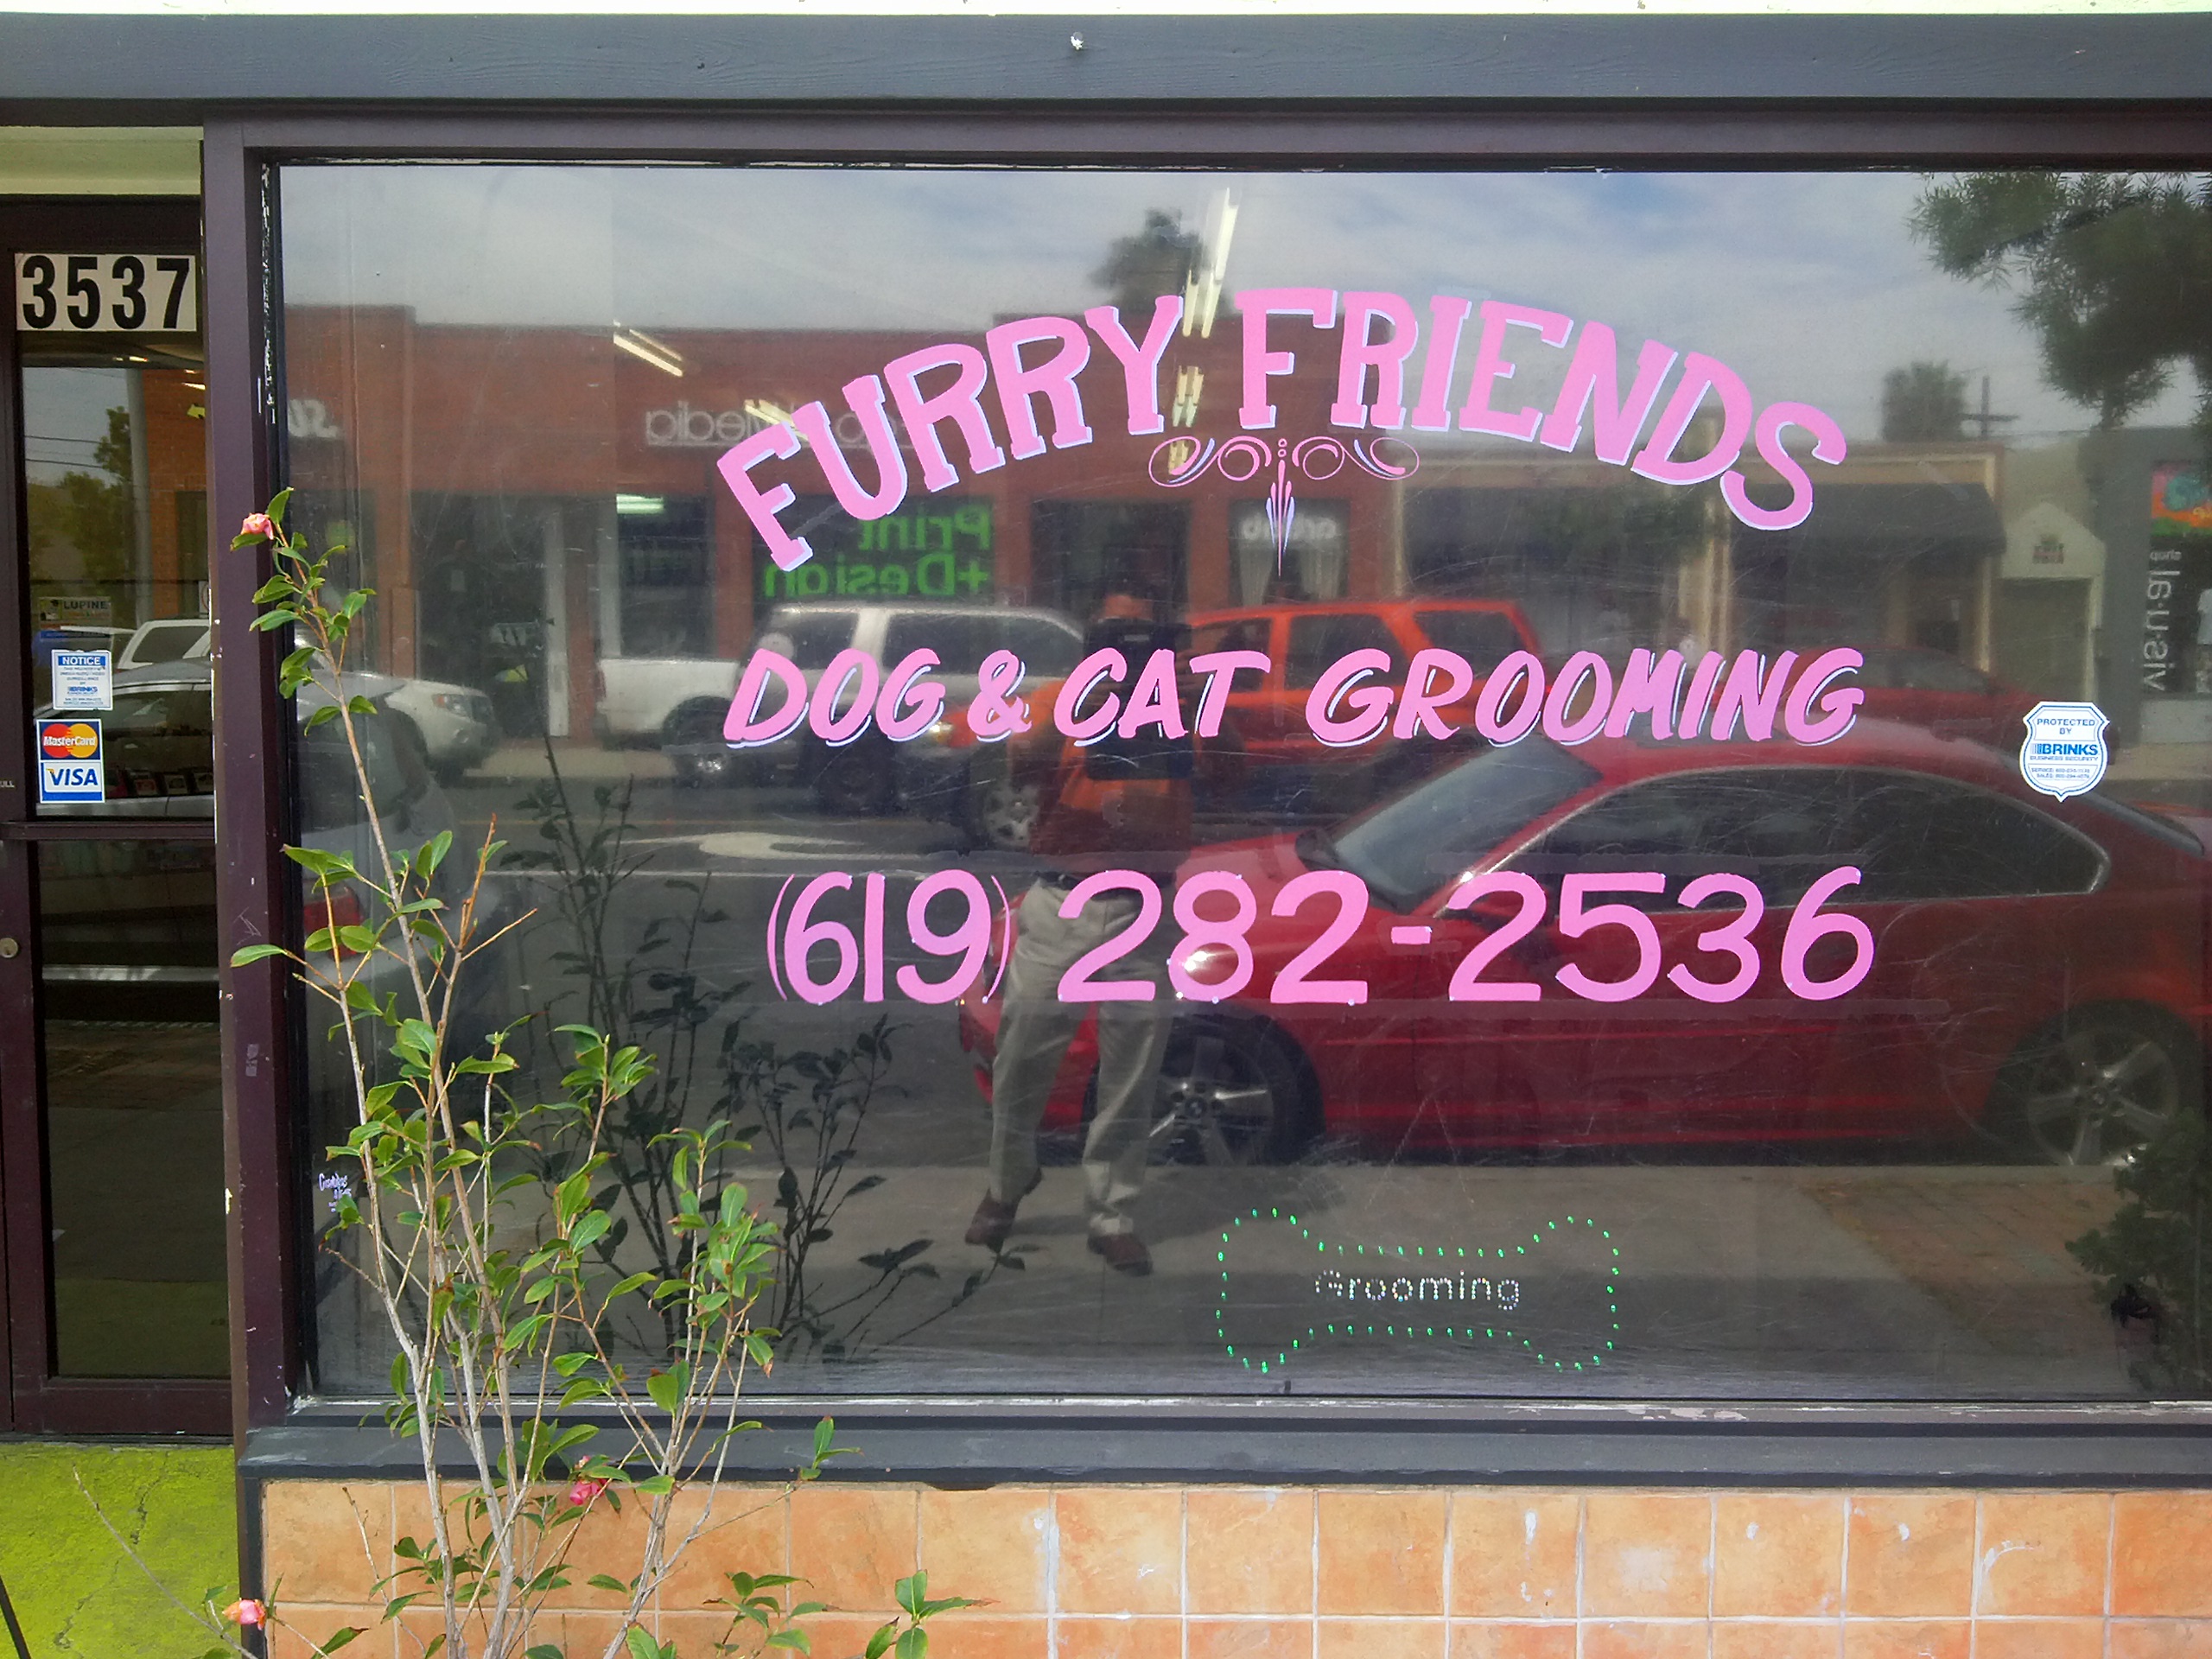 Furry Friends Dog and Cat Grooming San Diego (619)282-2536